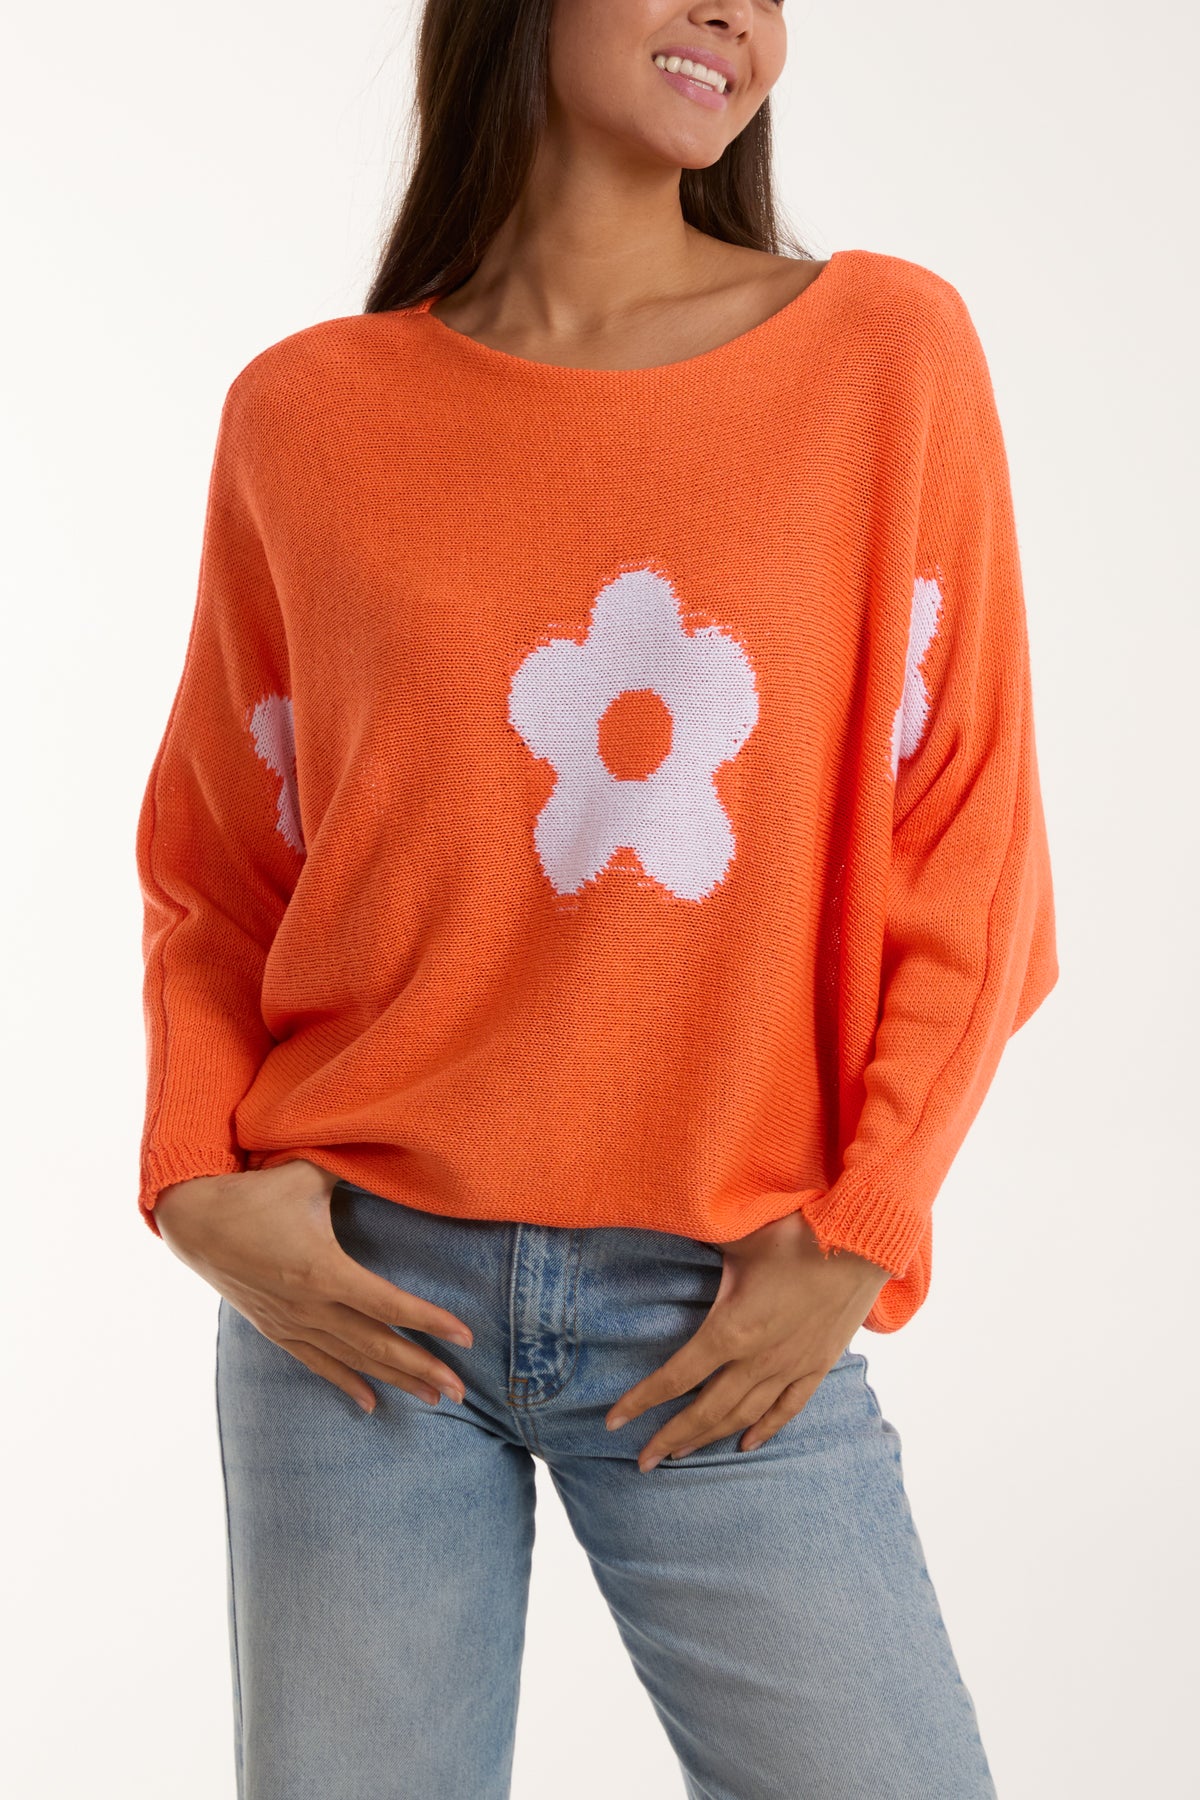 Daisies High Low Batwing Jumper